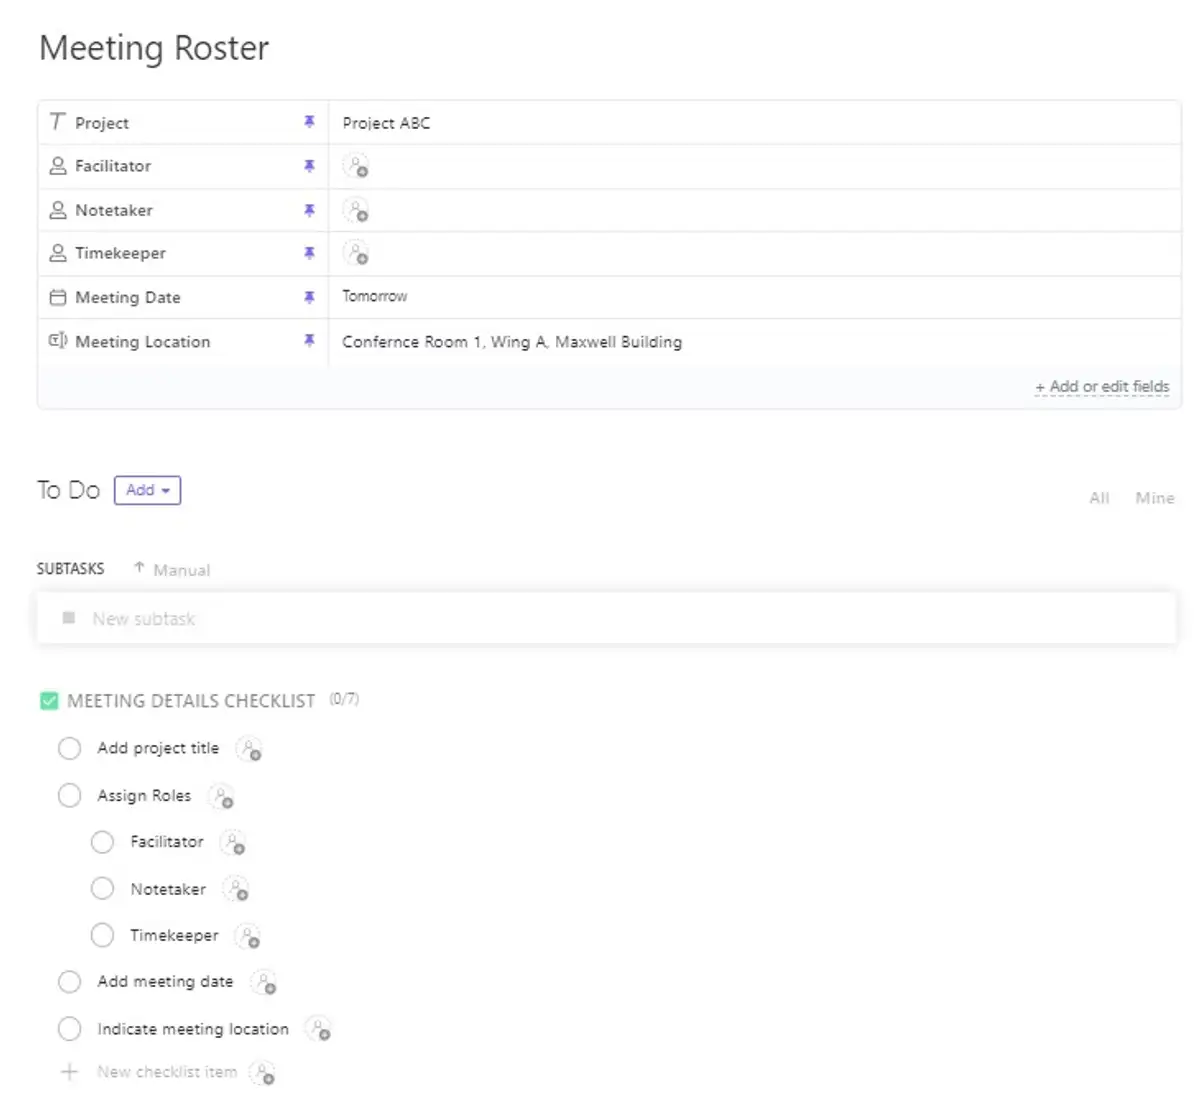 Assign meeting roles in the ClickUp Meeting Roster template easily